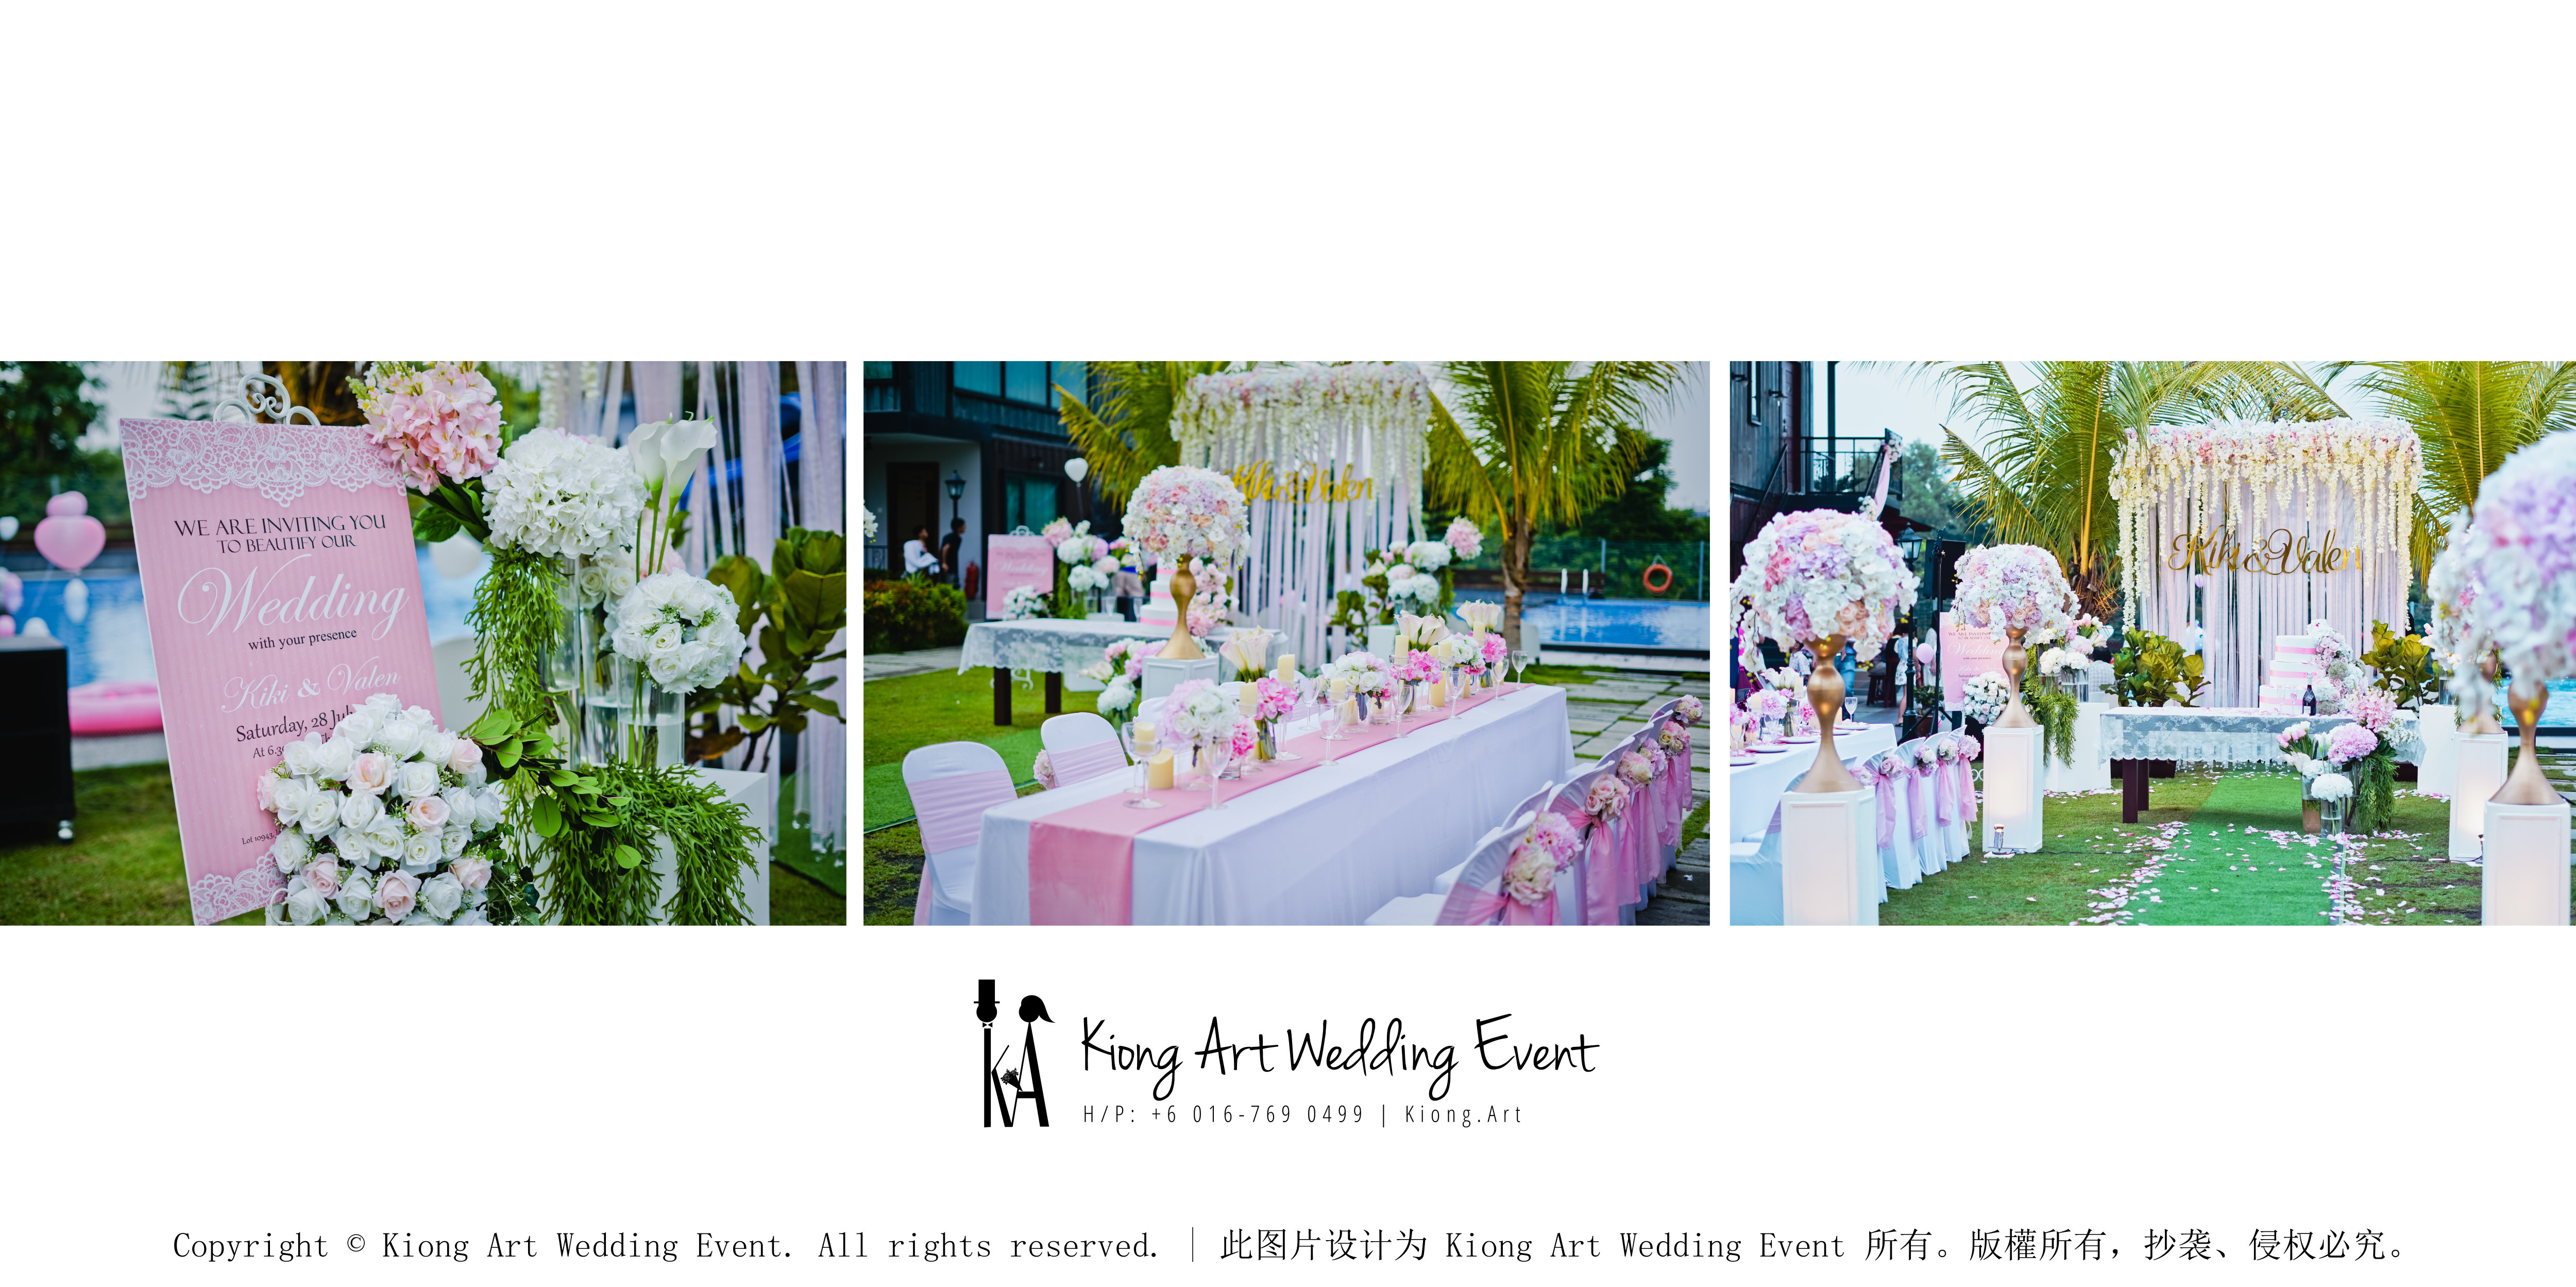 Kiong Art Wedding Event Kuala Lumpur Malaysia Wedding Decoration One-stop Wedding Planning Warm Outdoor Romantic Style Theme Kluang Container Swimming Pool Homestay A07-B00-02